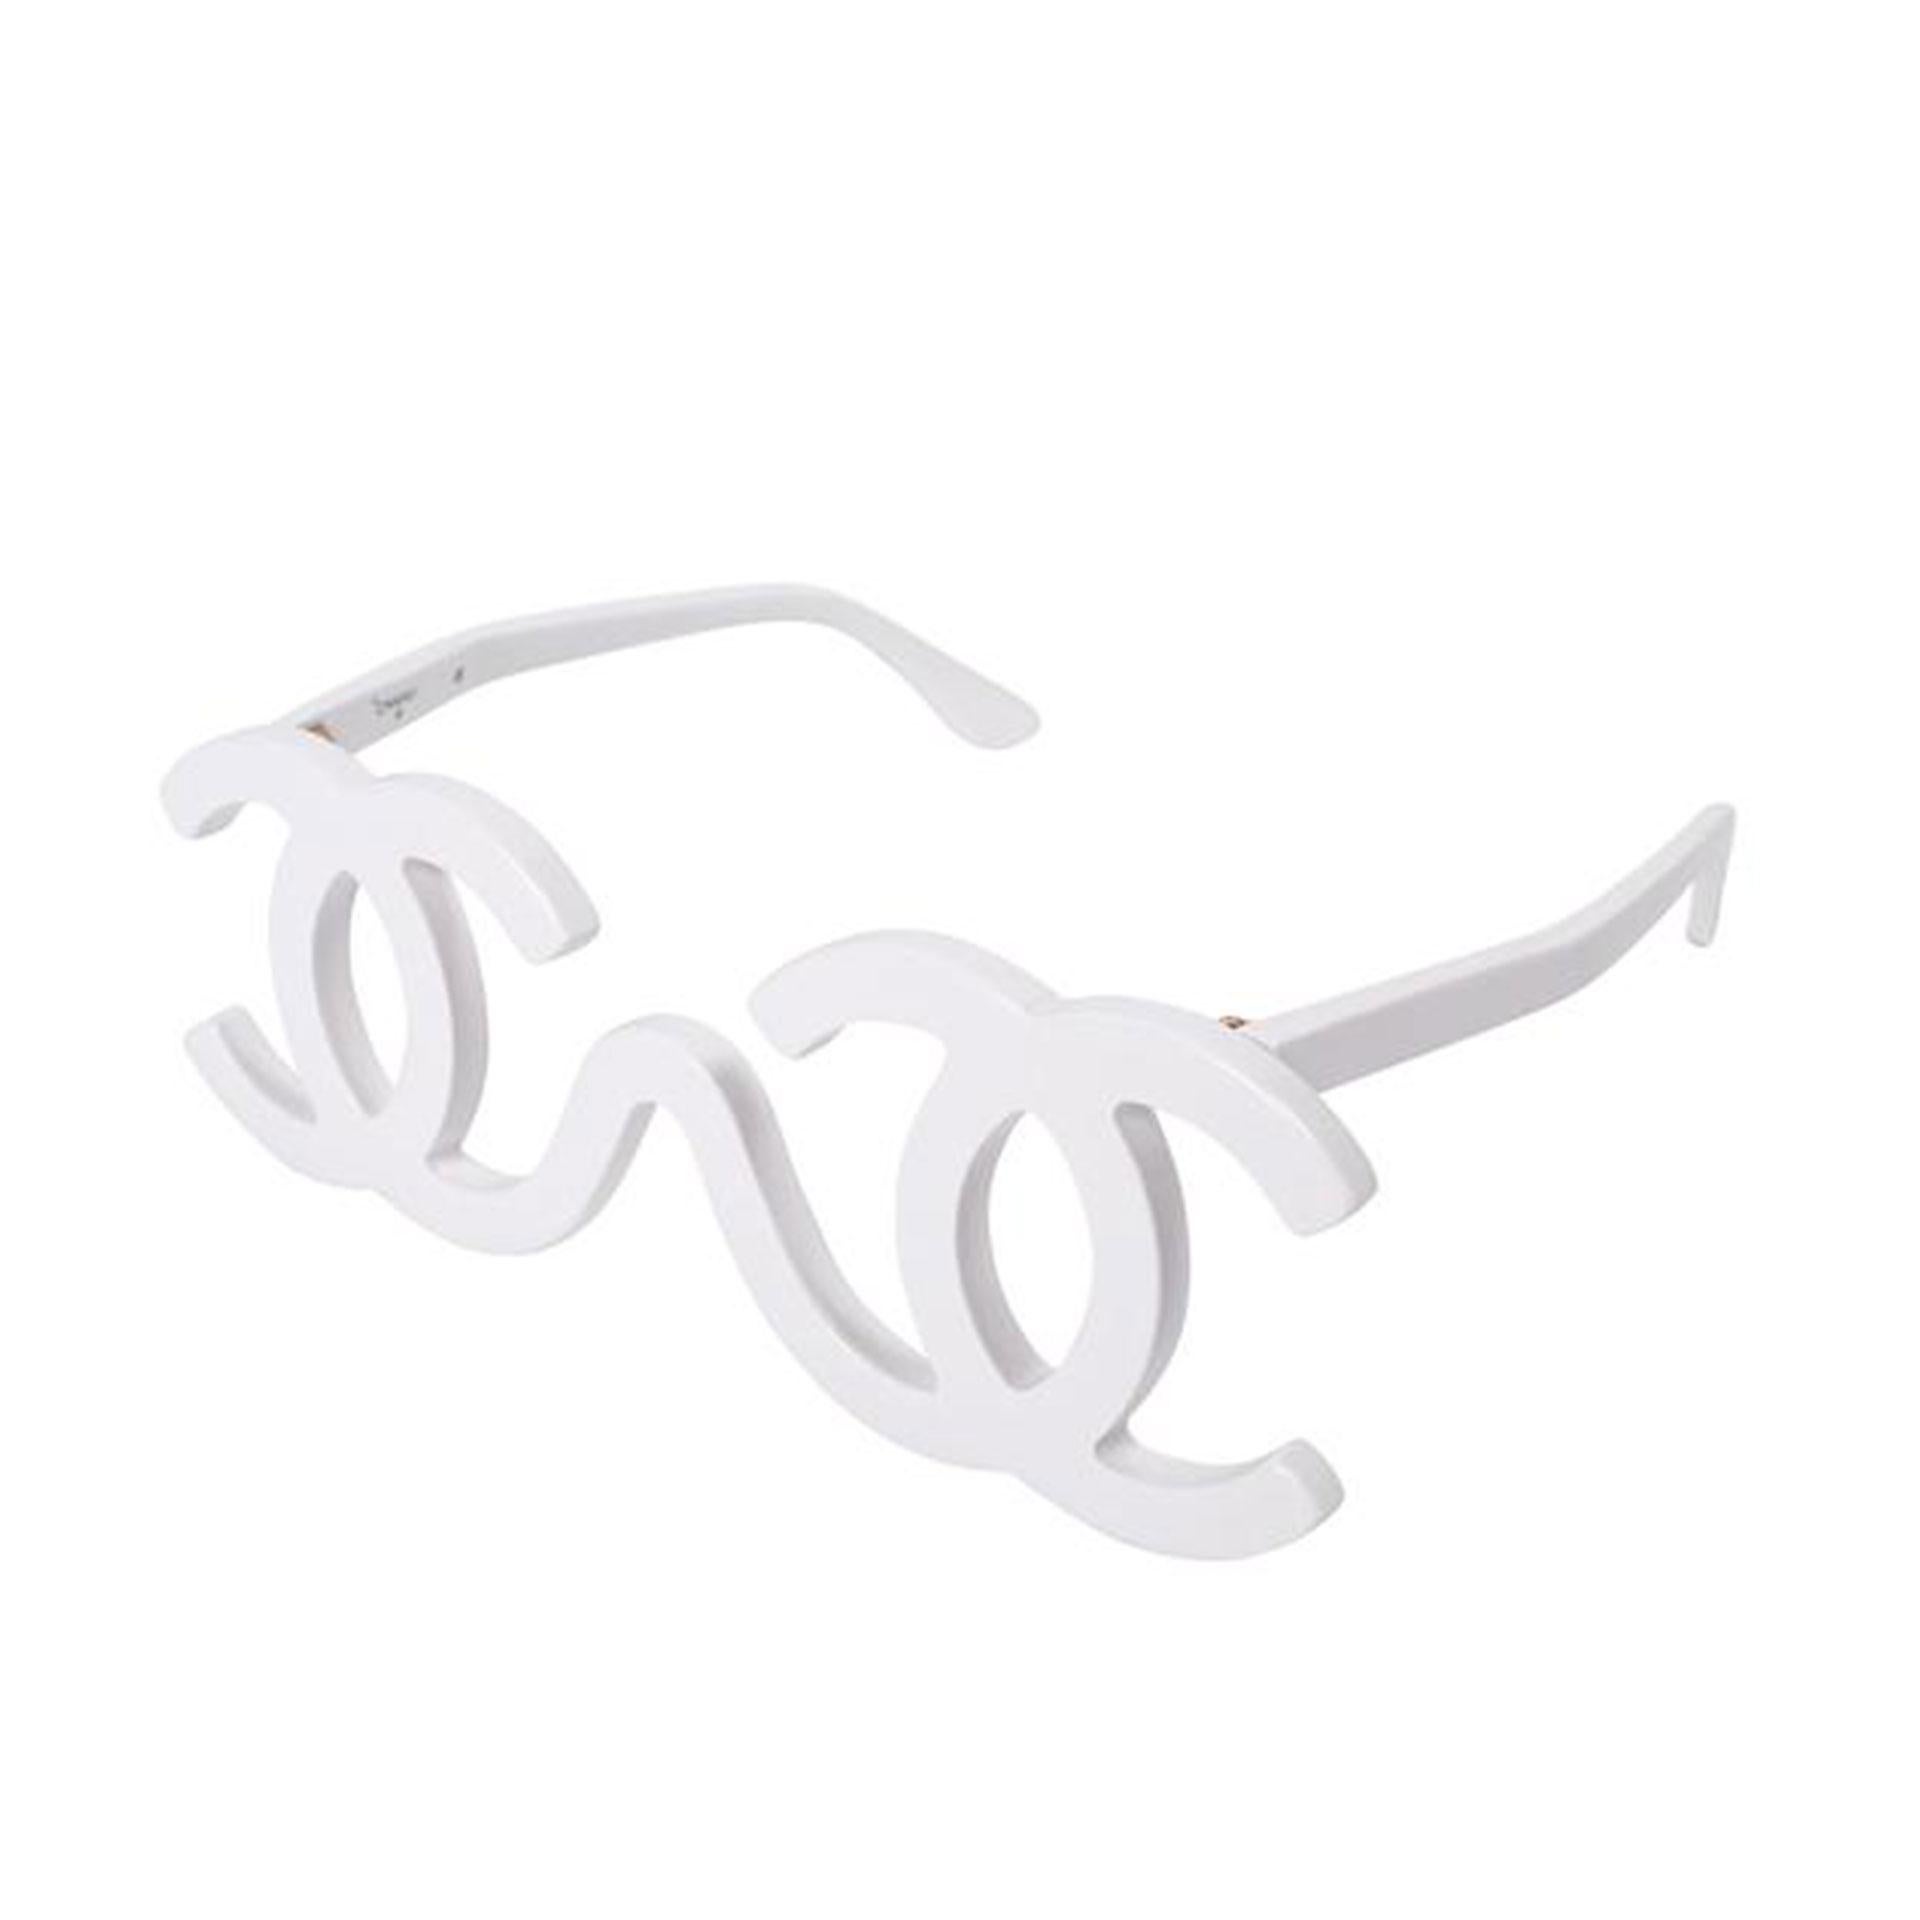 Chanel White 1994 Runway Karl Lagerfeld CC Logo Iconic Rare Sunglasses

From the 1994 Chanel runway collection, these glasses were made for the catwalk as a Sample and never made it to stores.  

As seen on Rihanna, Bella Thorne, Migos, and Cardi